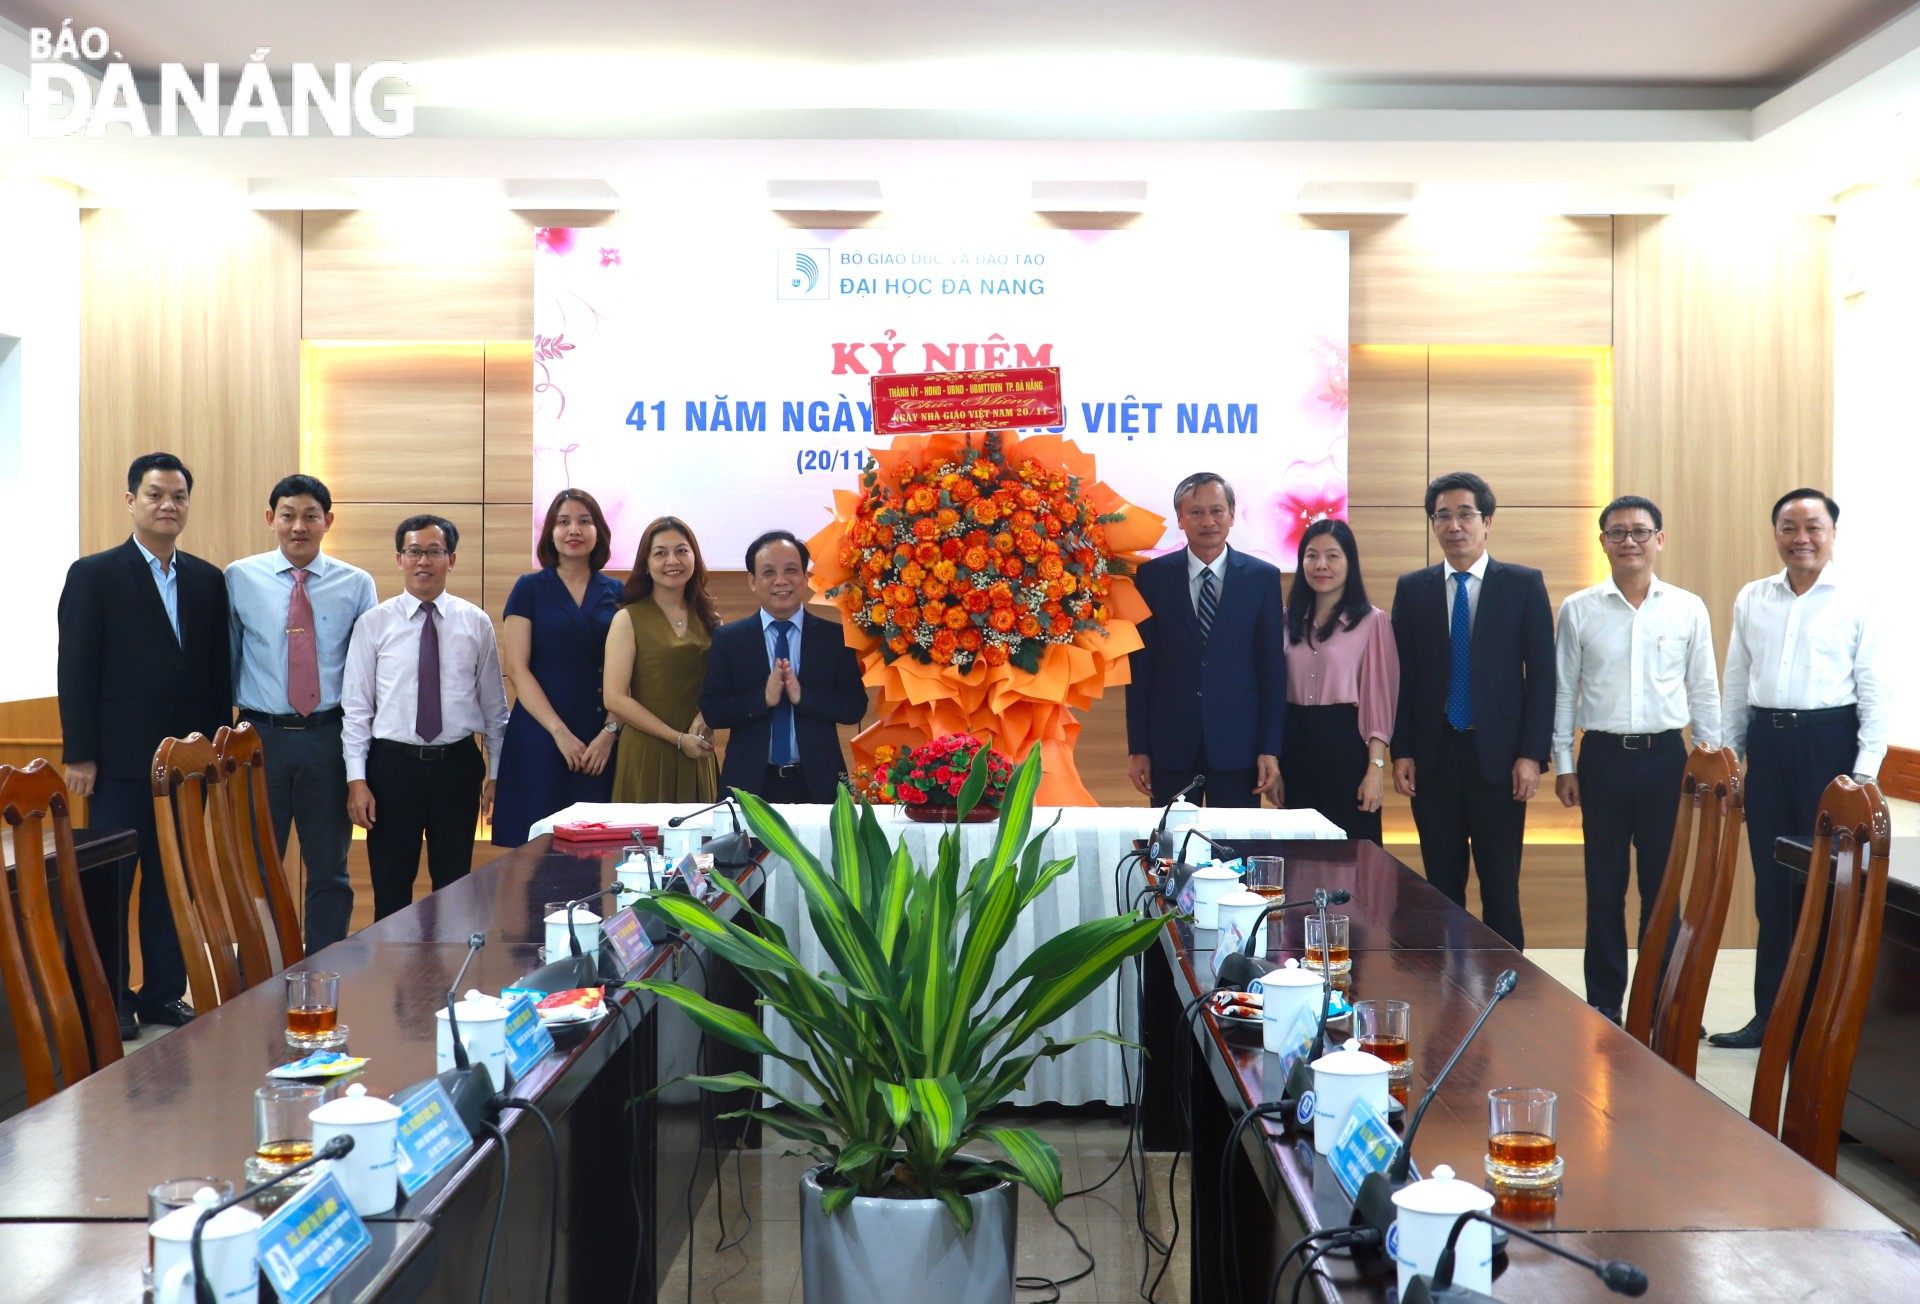 Head of the municipal Party Committee's Publicity and Training Department Doan Ngoc Hung Anh (5th, right) congratulates the University of Da Nang on the 41st anniversary of Vietnamese Teachers' Day. Photo: N.Q